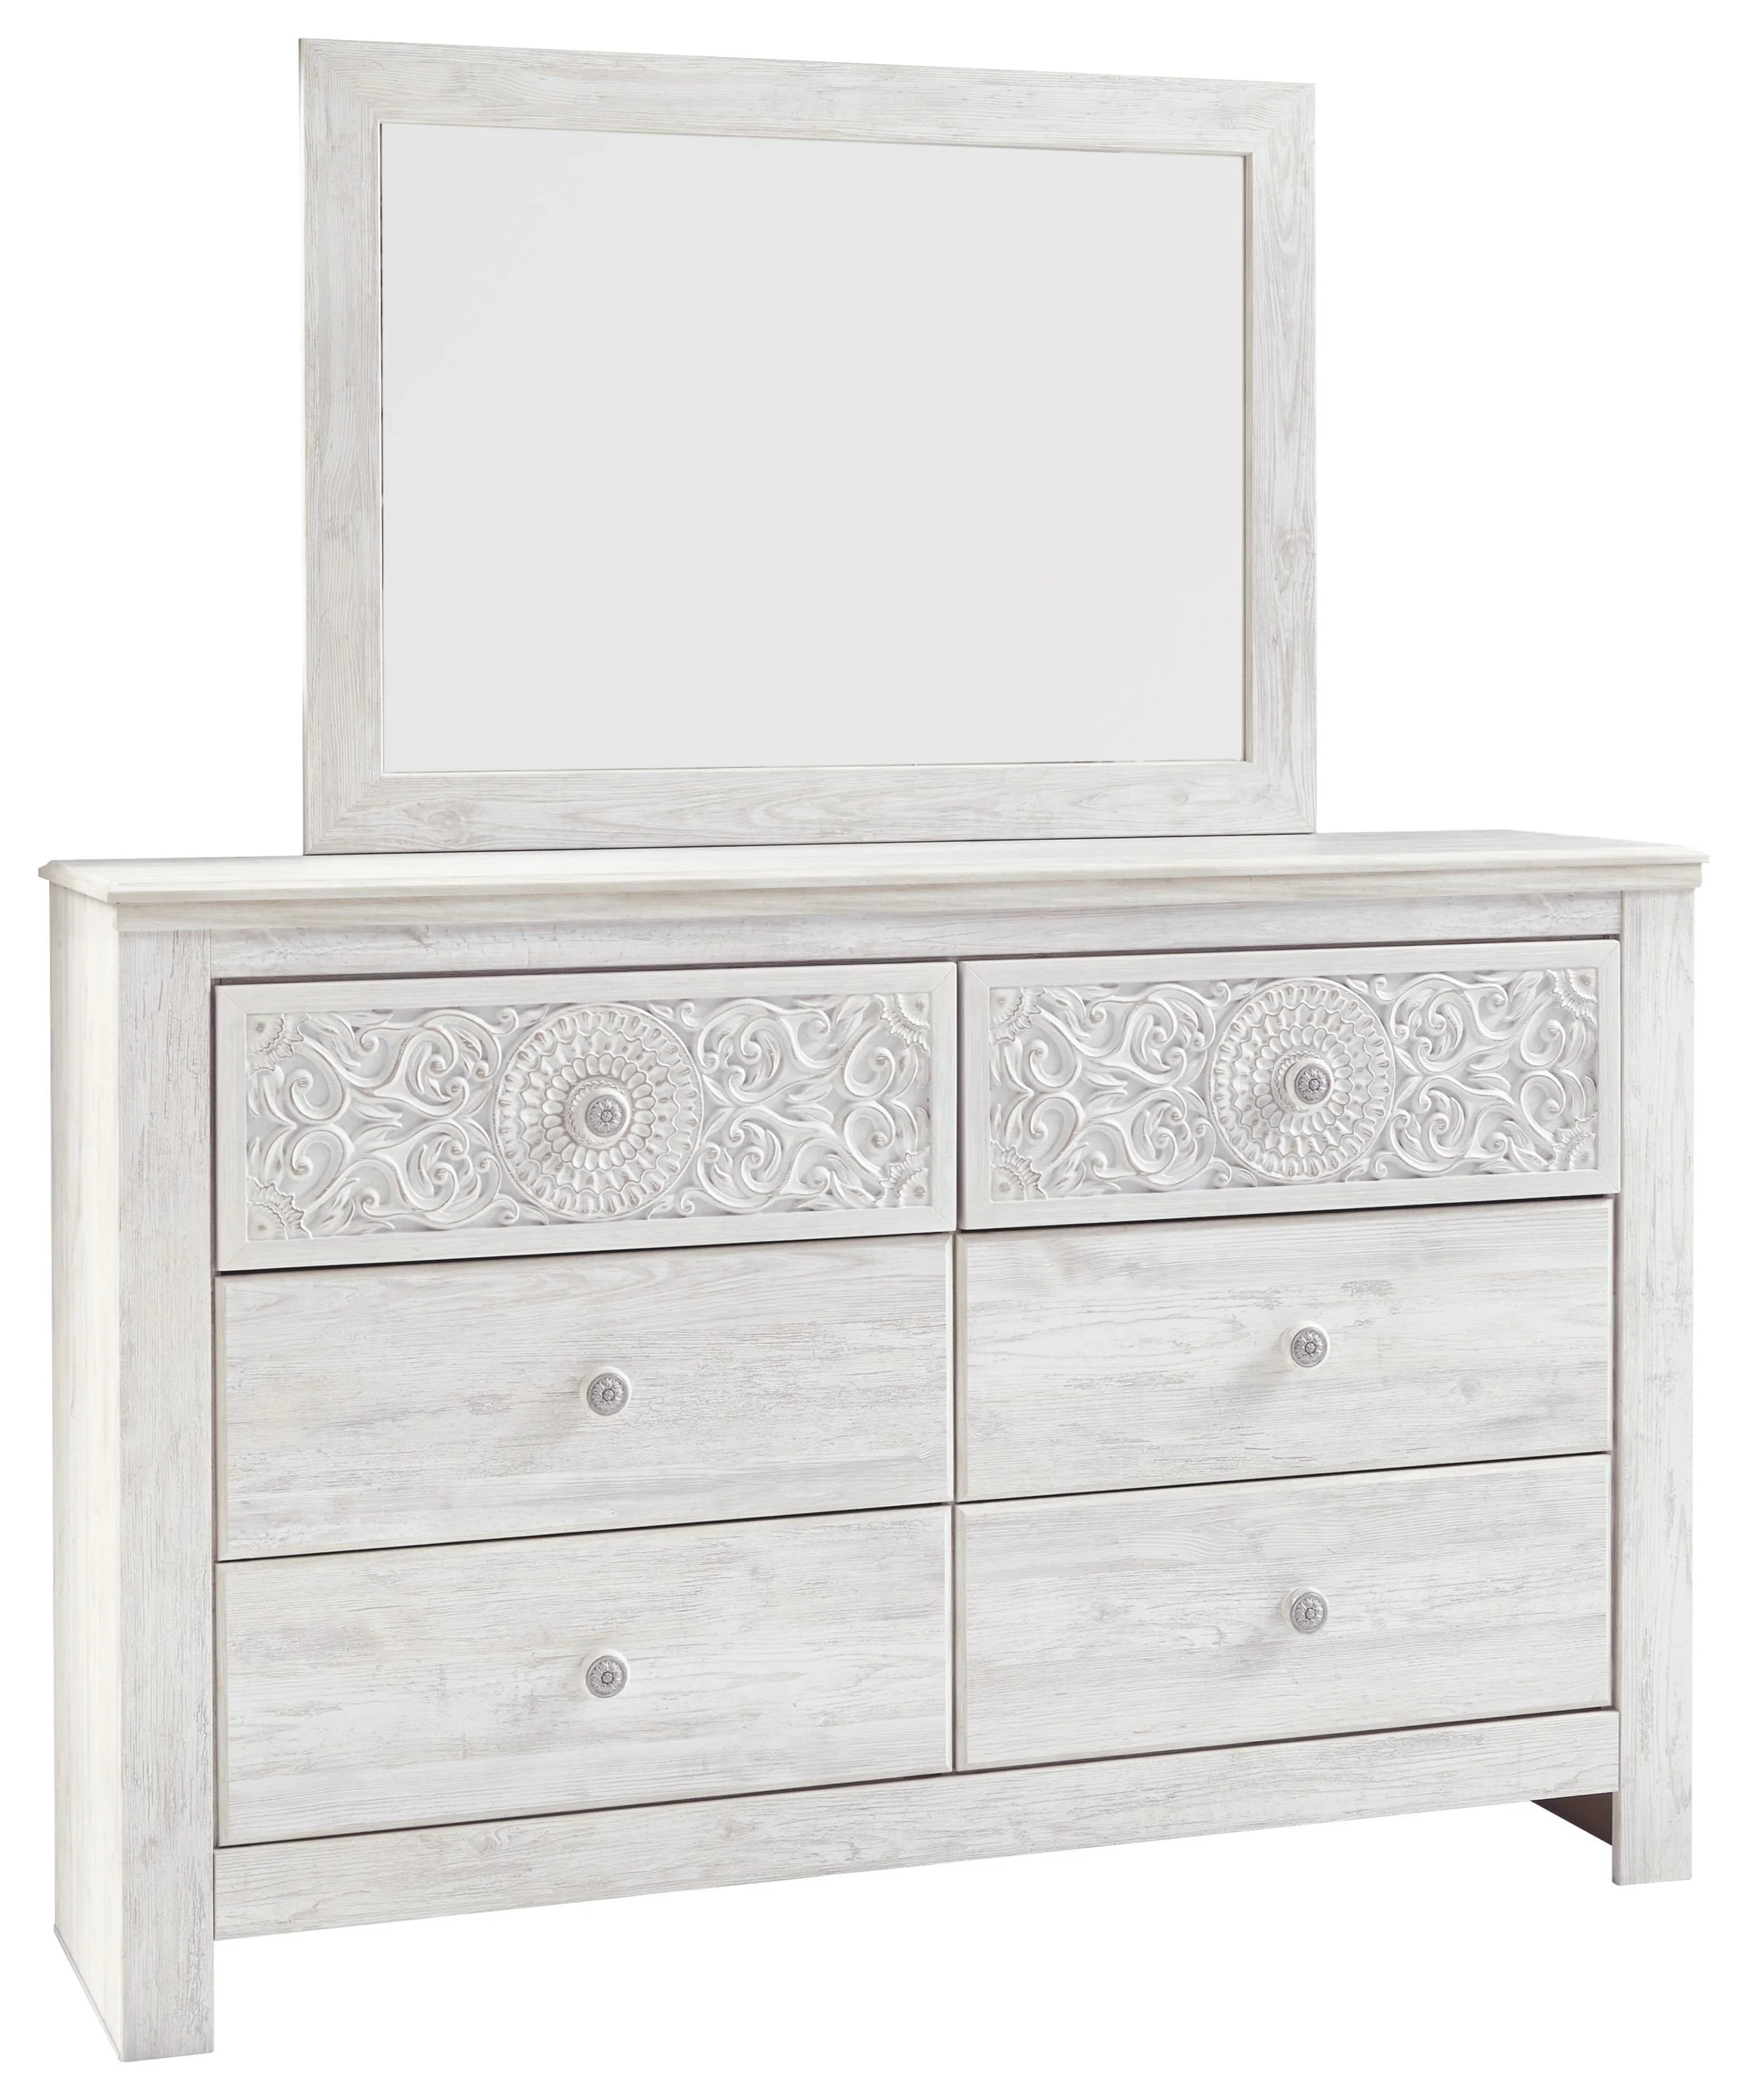 Paxberry White Dresser & Mirror - Kids Dressers and Mirrors